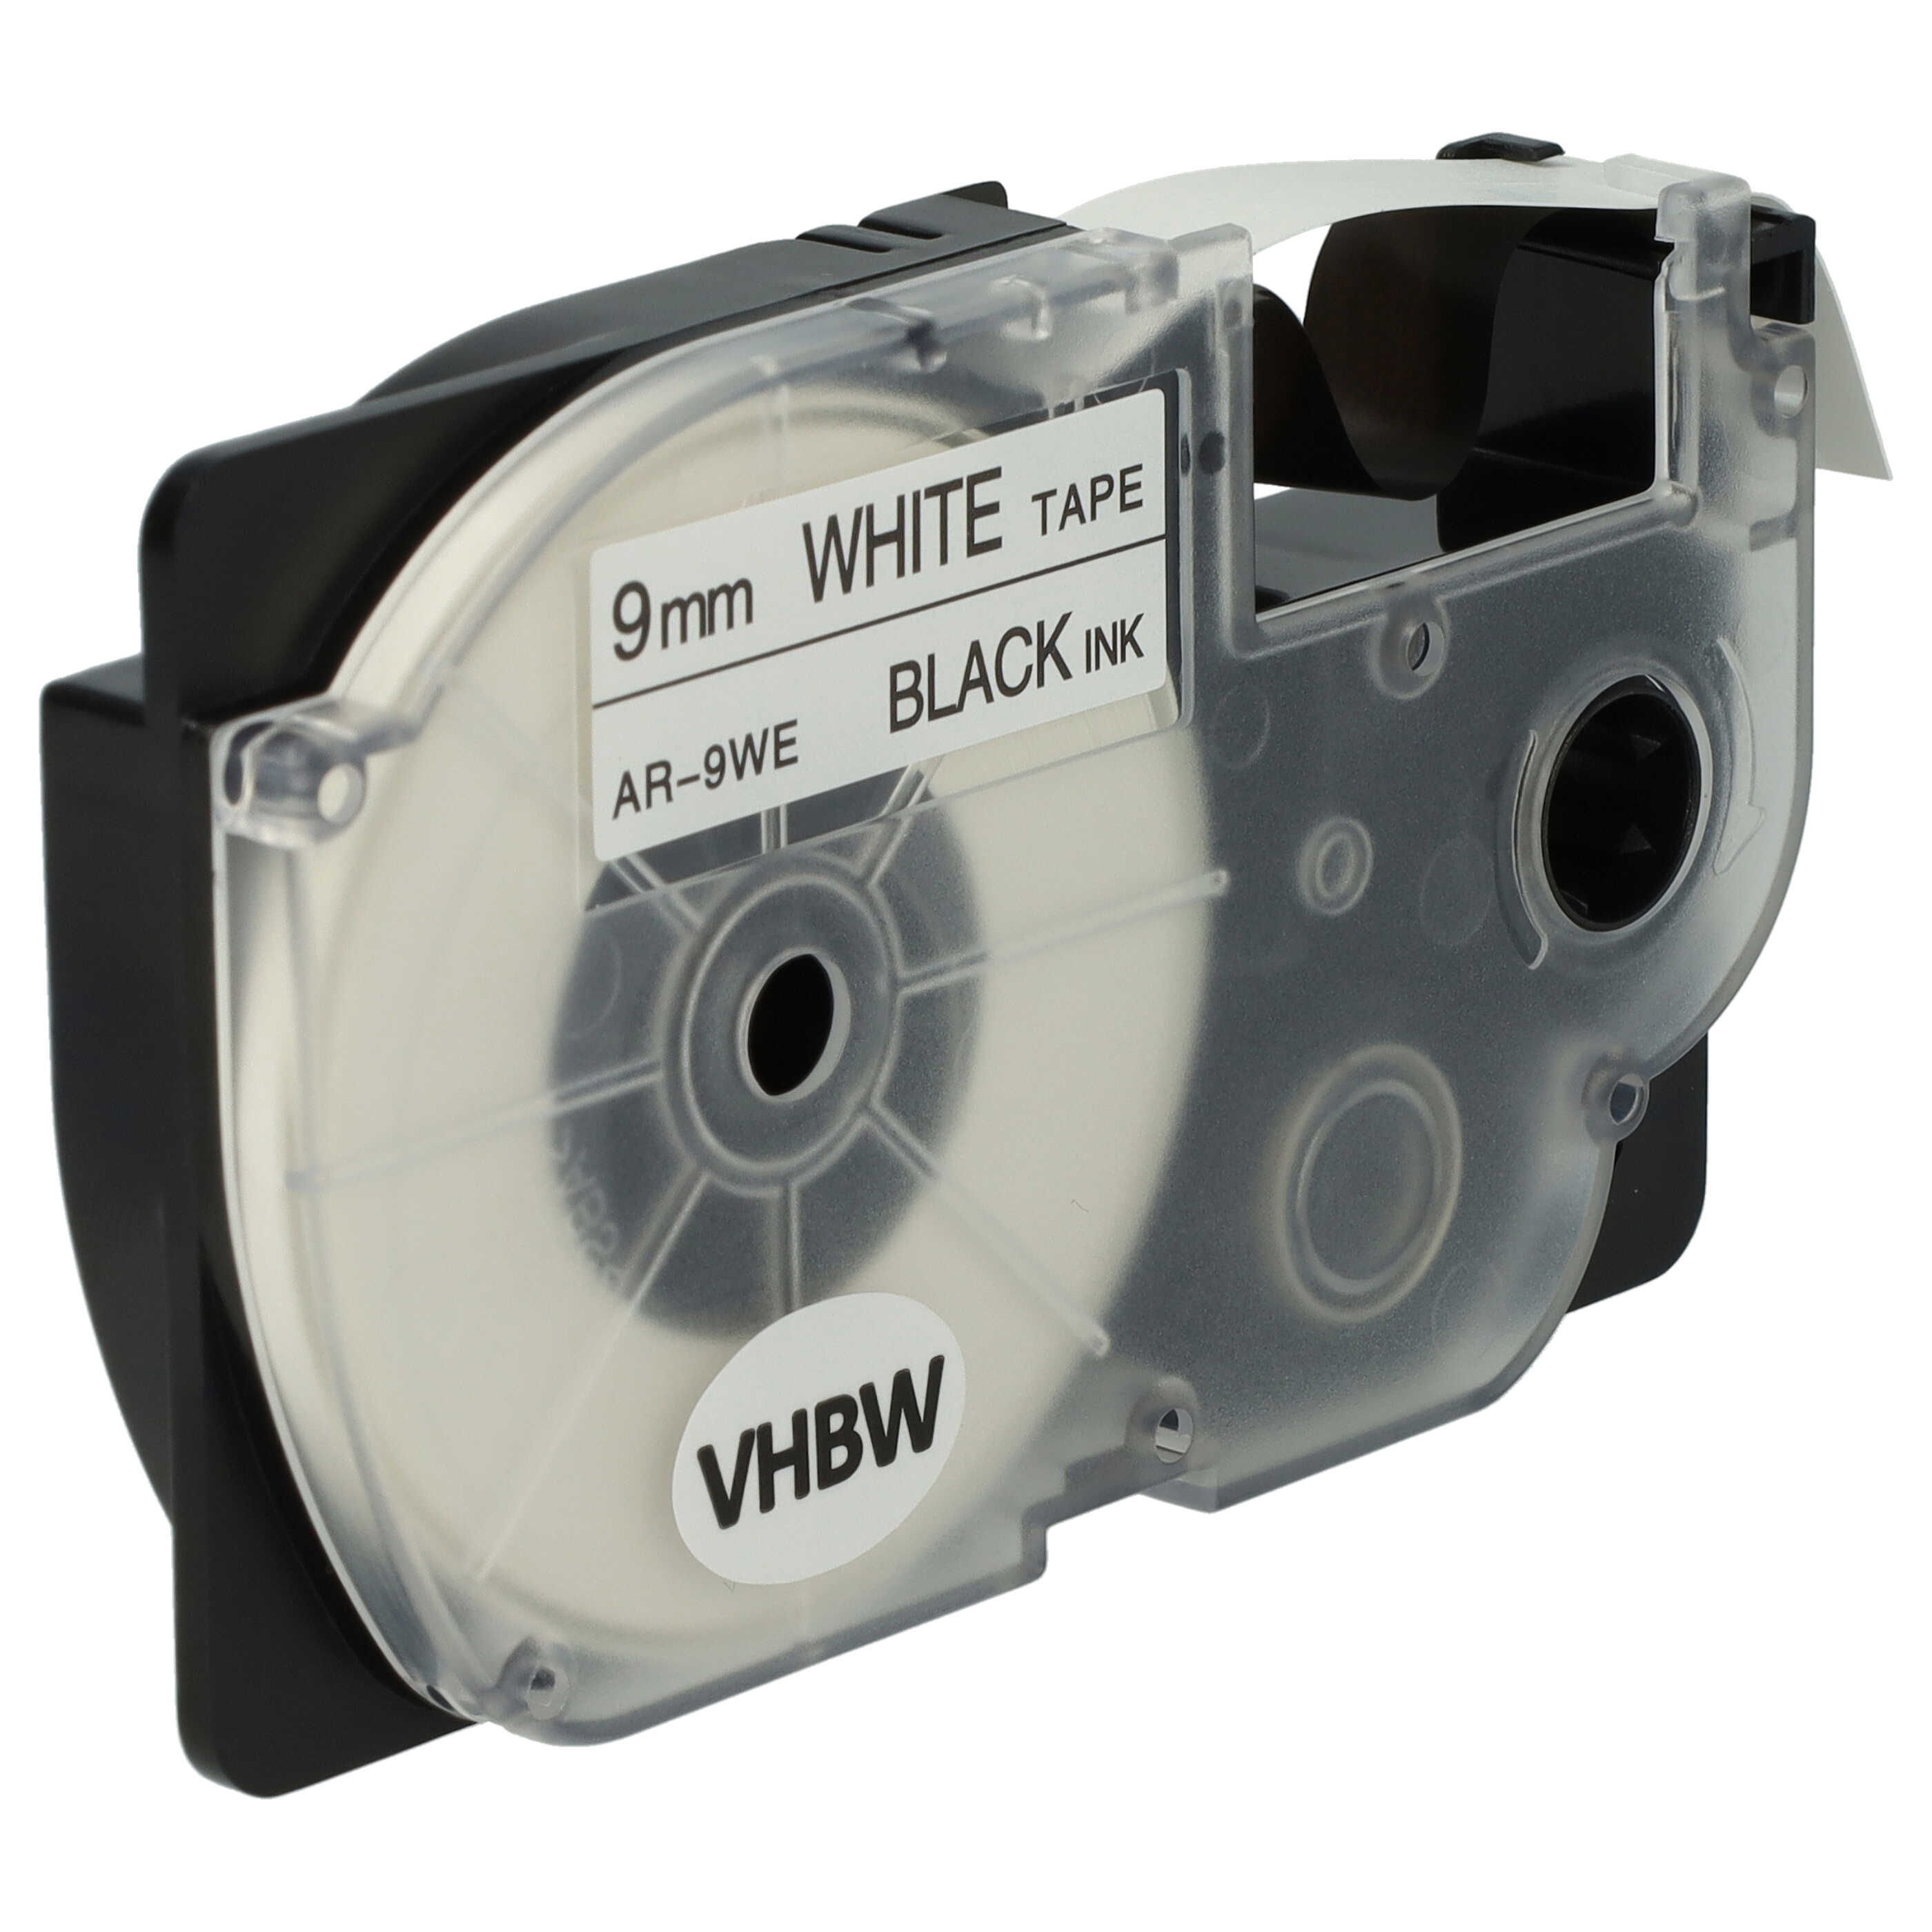 Label Tape as Replacement for Casio XR-9WE1, XR-9WE - 9 mm Black to White